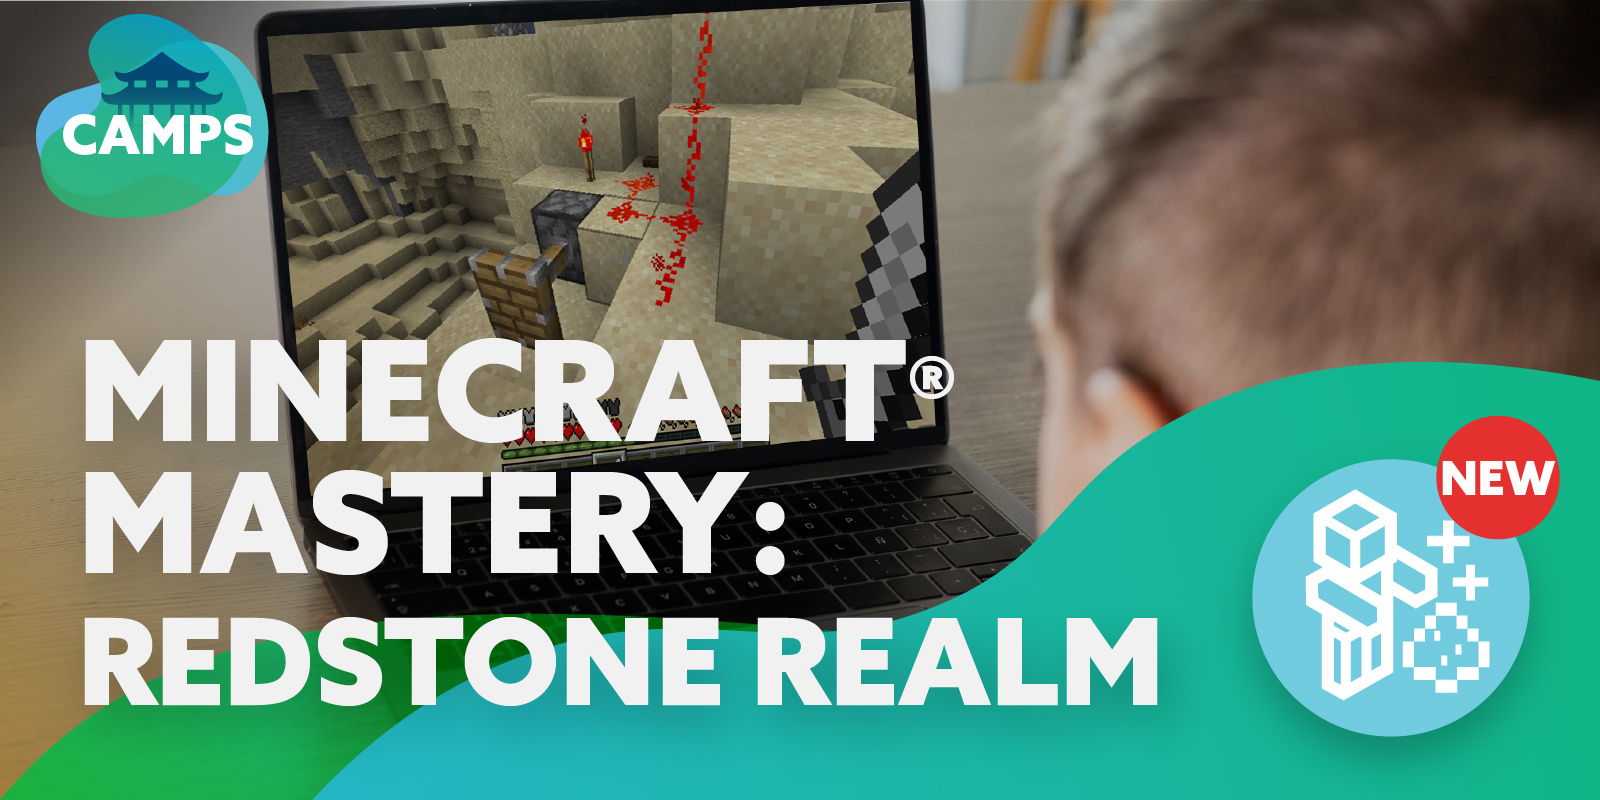 Minecraft Mastery: Redstone Realm promotional image